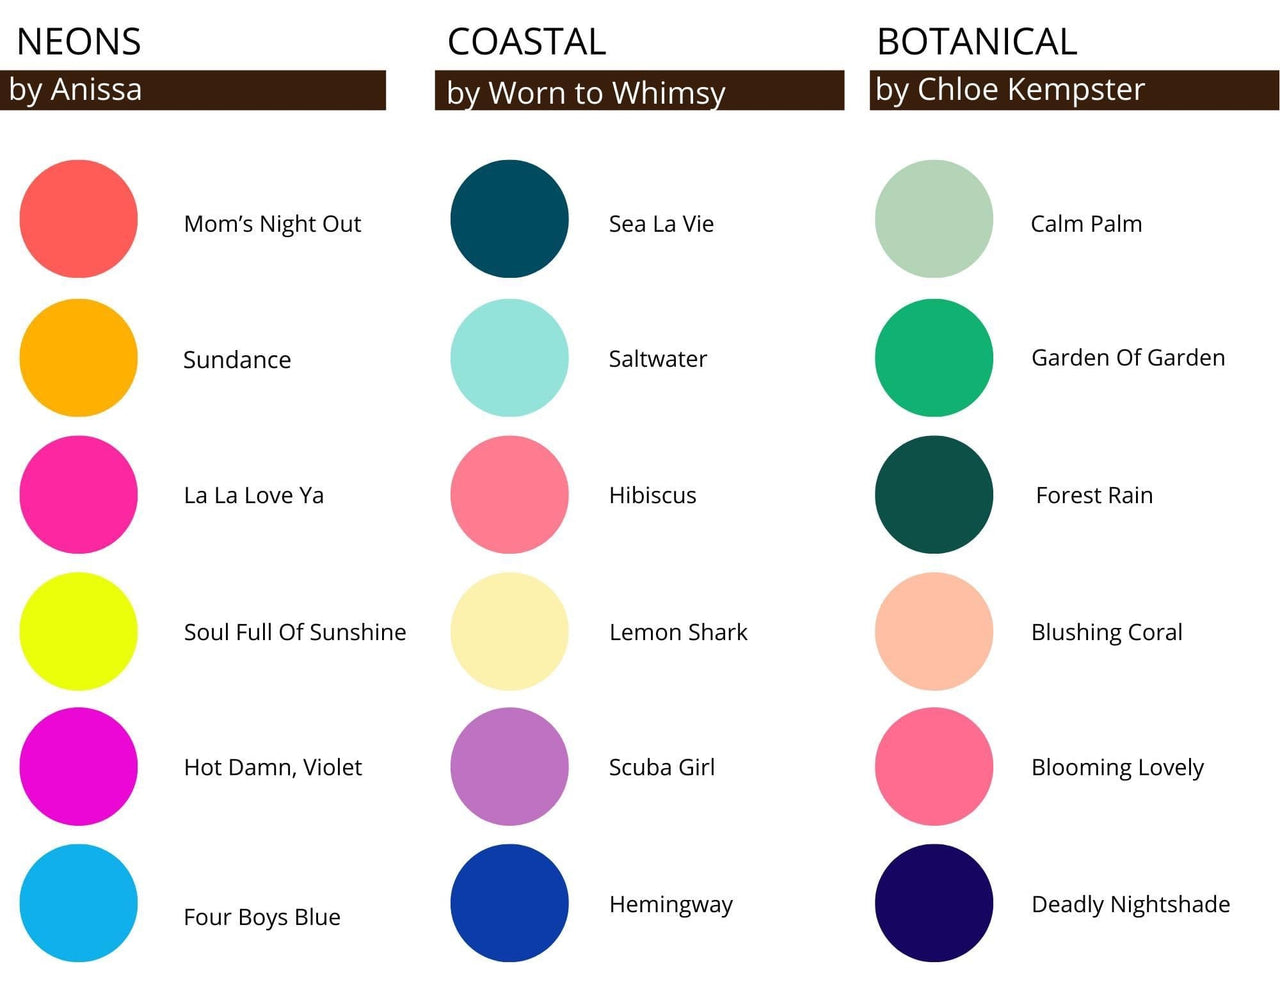 Coastal By Llewelyn of Worn to Whimsy-Clay and Chalk Paint - Daydream Apothecary Paint Zero VOC - Rubbish Restyled